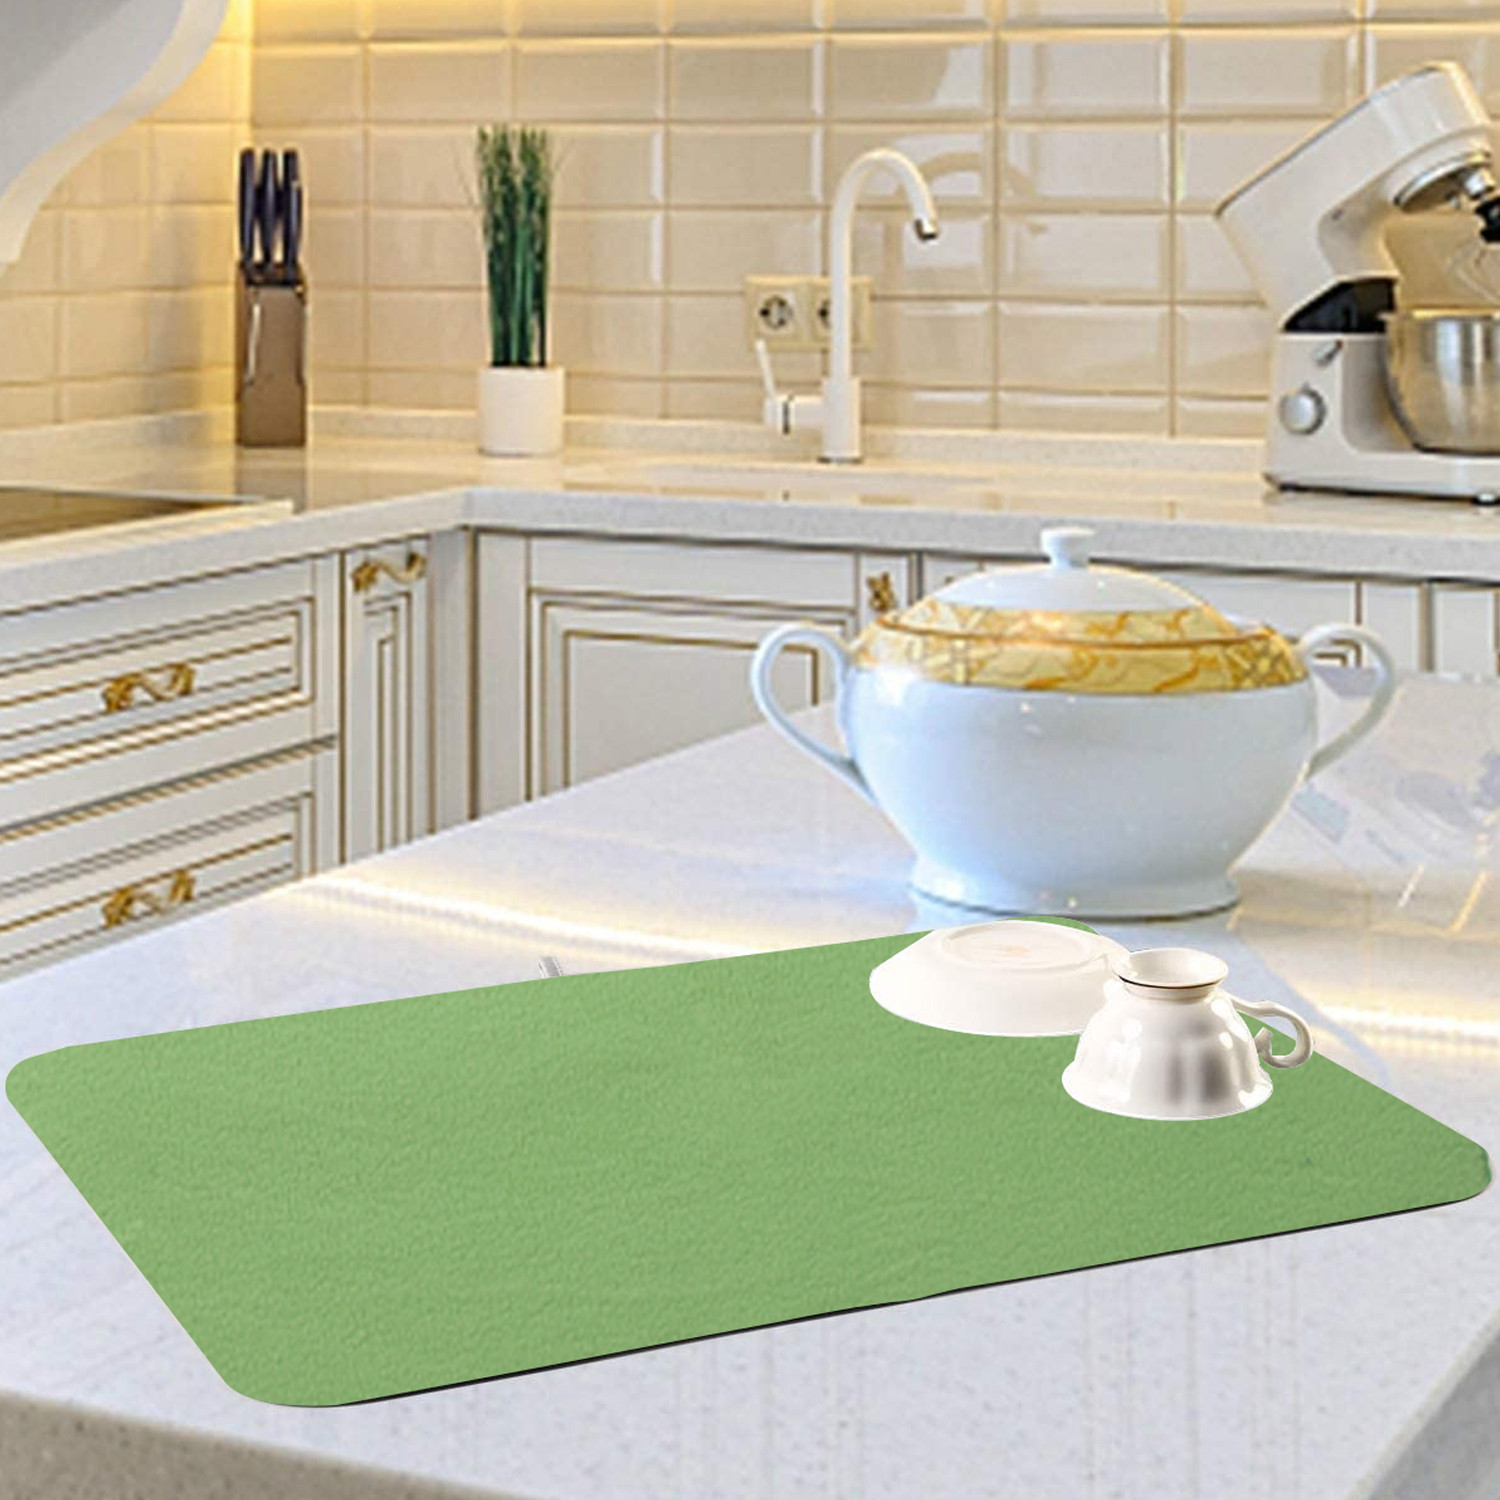 Kuber Industries Microfiber Reversible Dish Drying Mat With Absorbent Parity For Kitchen 19